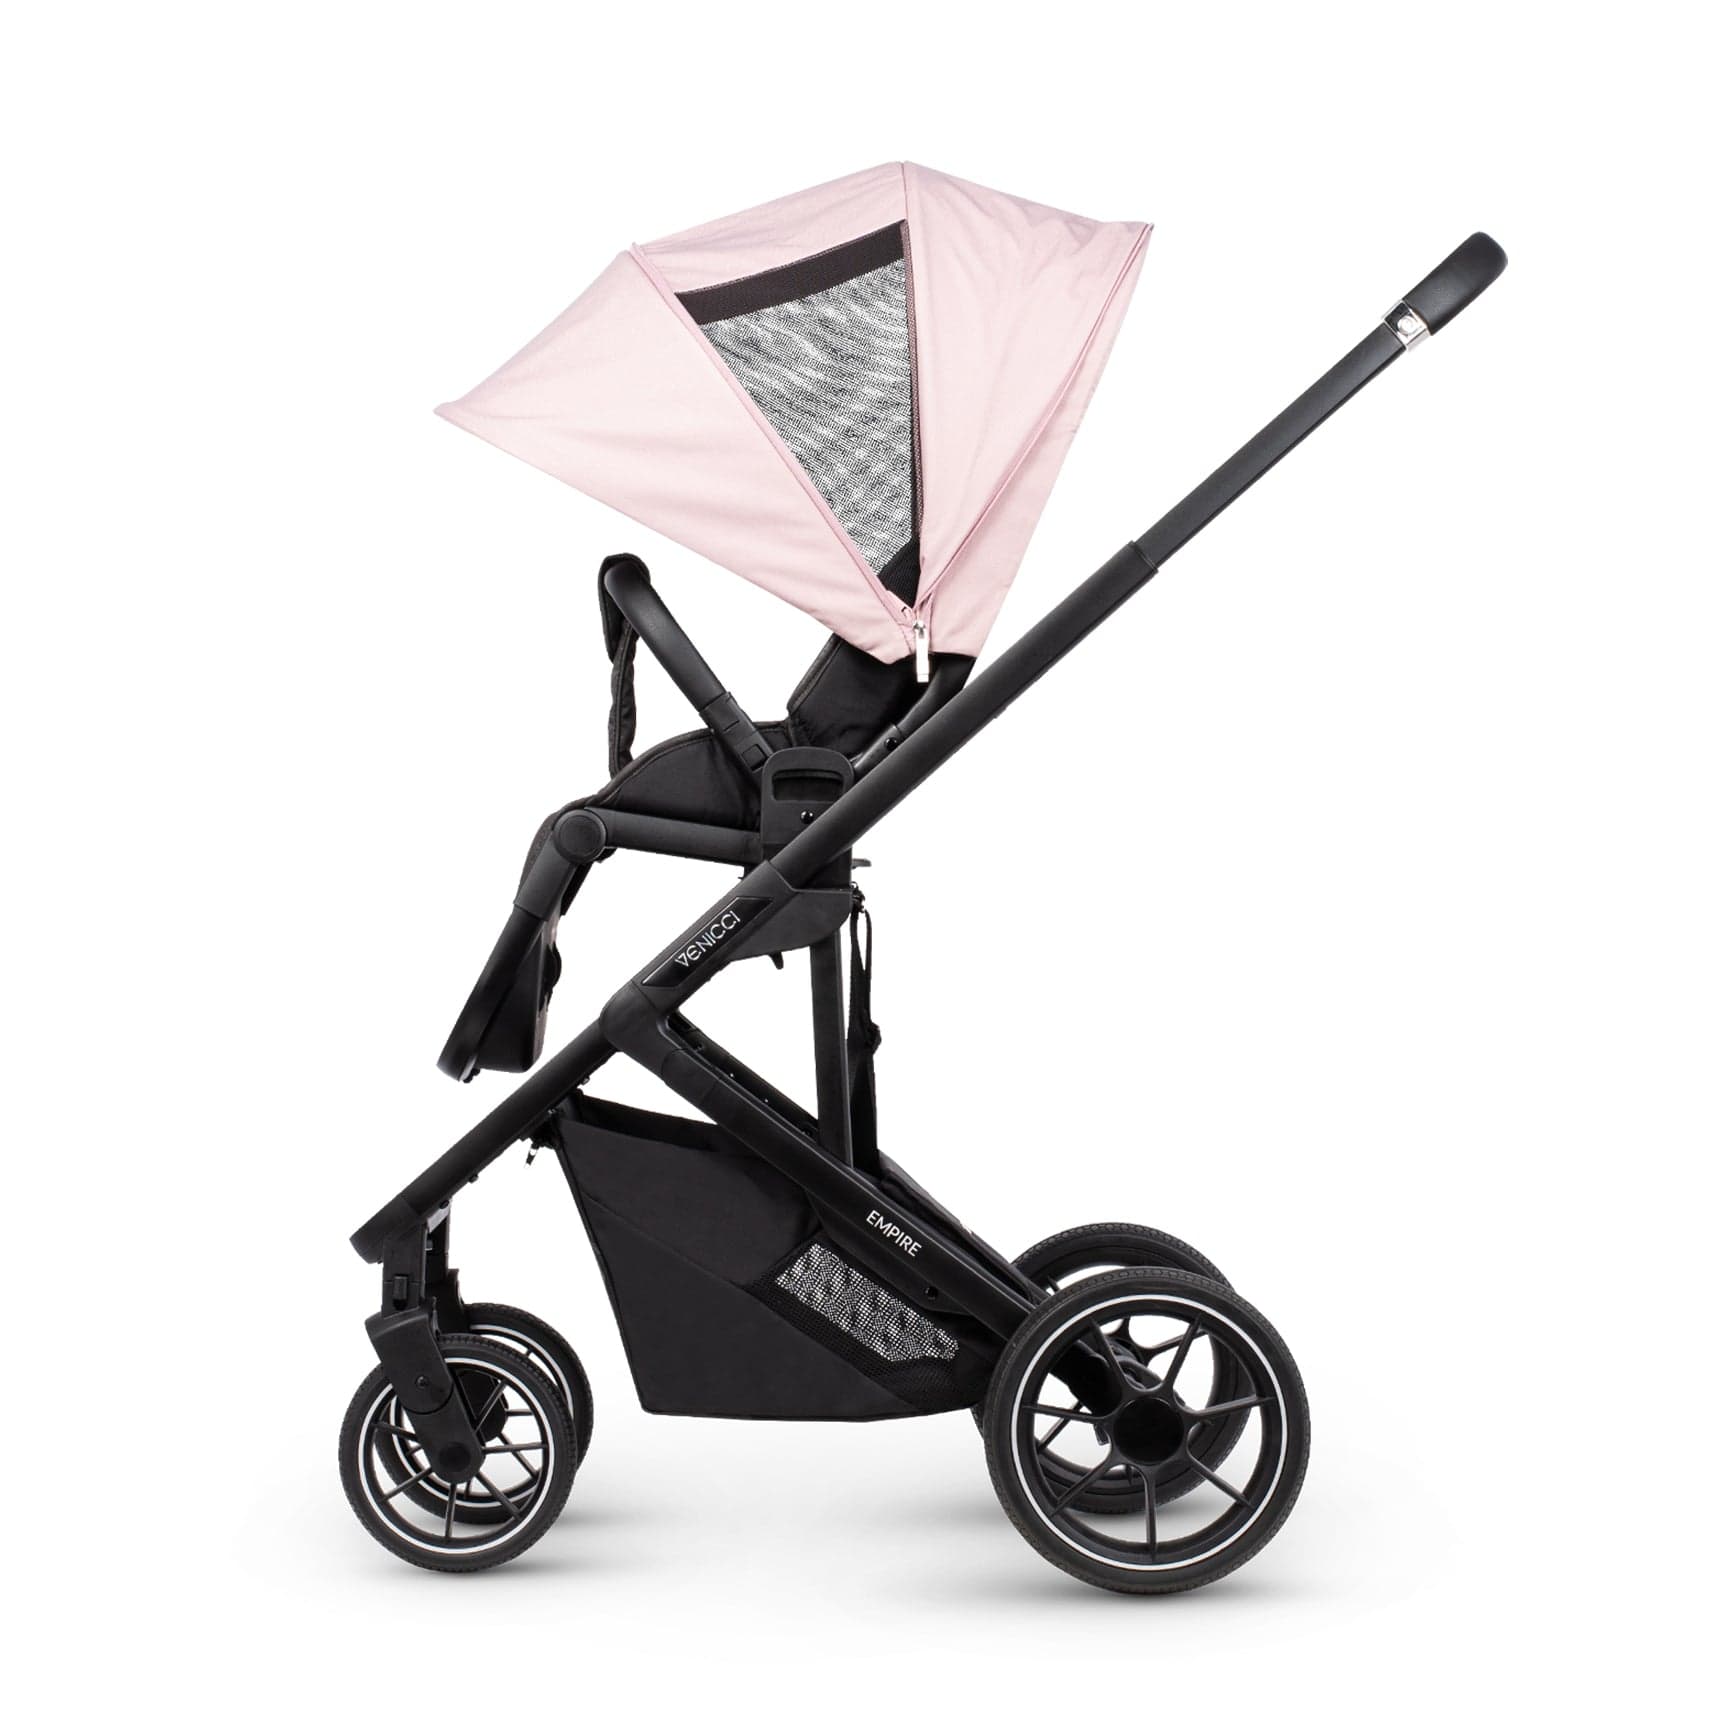 Venicci Empire Deluxe City Travel System in Silk Pink Travel Systems 2100710408 5905261331847